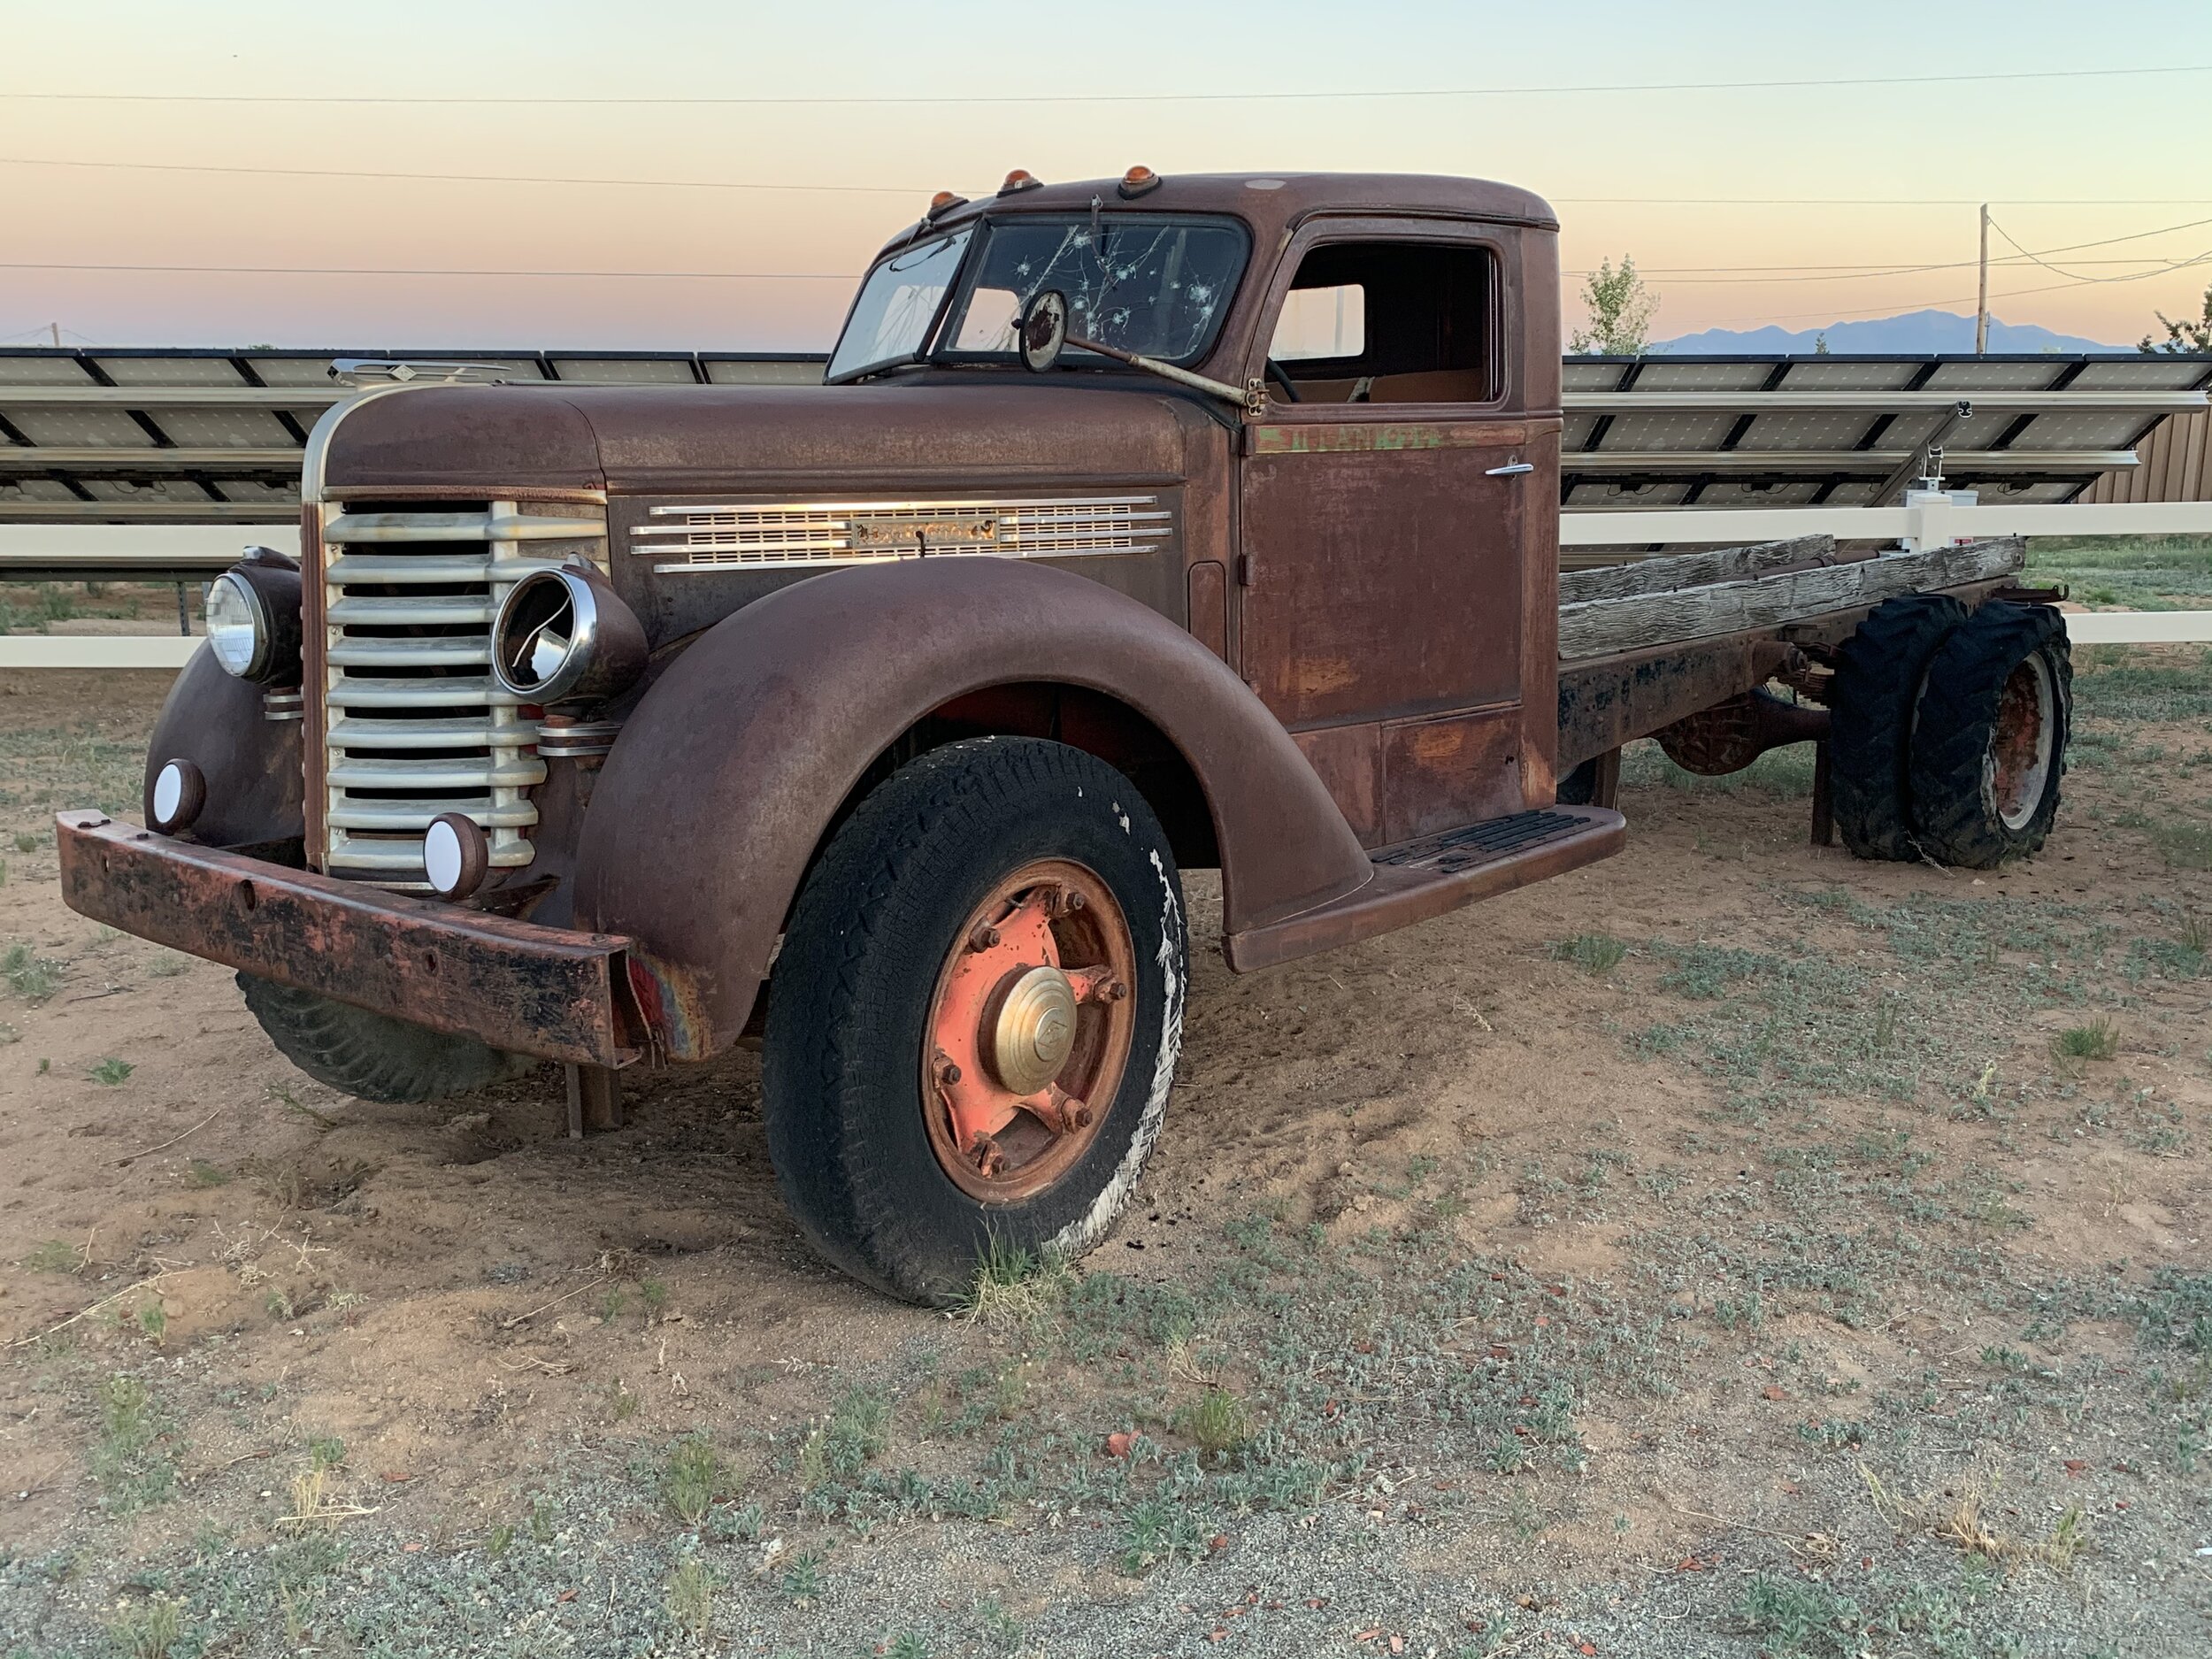  This 1949 truck was left at an auto repair shop in 1951 and never picked up by the owner. In 1988 the owner of our RV Park purchased it from the auto shop for $50. After sitting at the auto shop for almost 40 years, the truck still ran and the new o